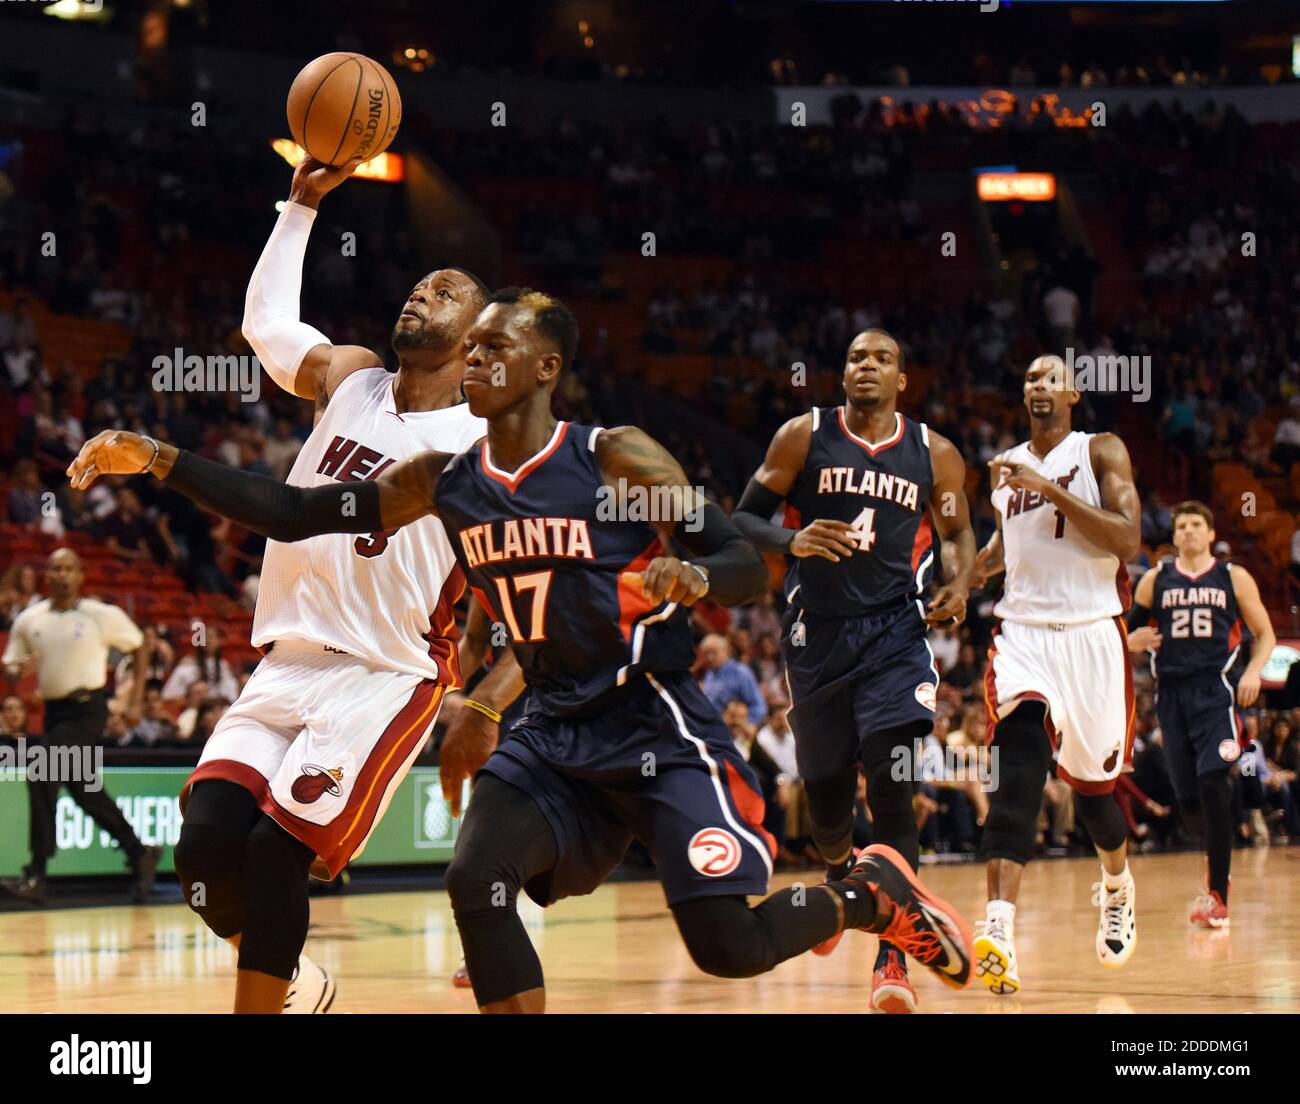 NO FILM, NO VIDEO, NO TV, NO DOCUMENTARY - Miami's Dwyane Wade breaks free for an easy basket against the Hawks at AmericanAirlines Arena in Miami, FL, USA on December 3, 2014. The Hawks won 112-102. Photo by Jim Rassol/Sun Sentinel/TNS/ABACAPRESS.COM Stock Photo